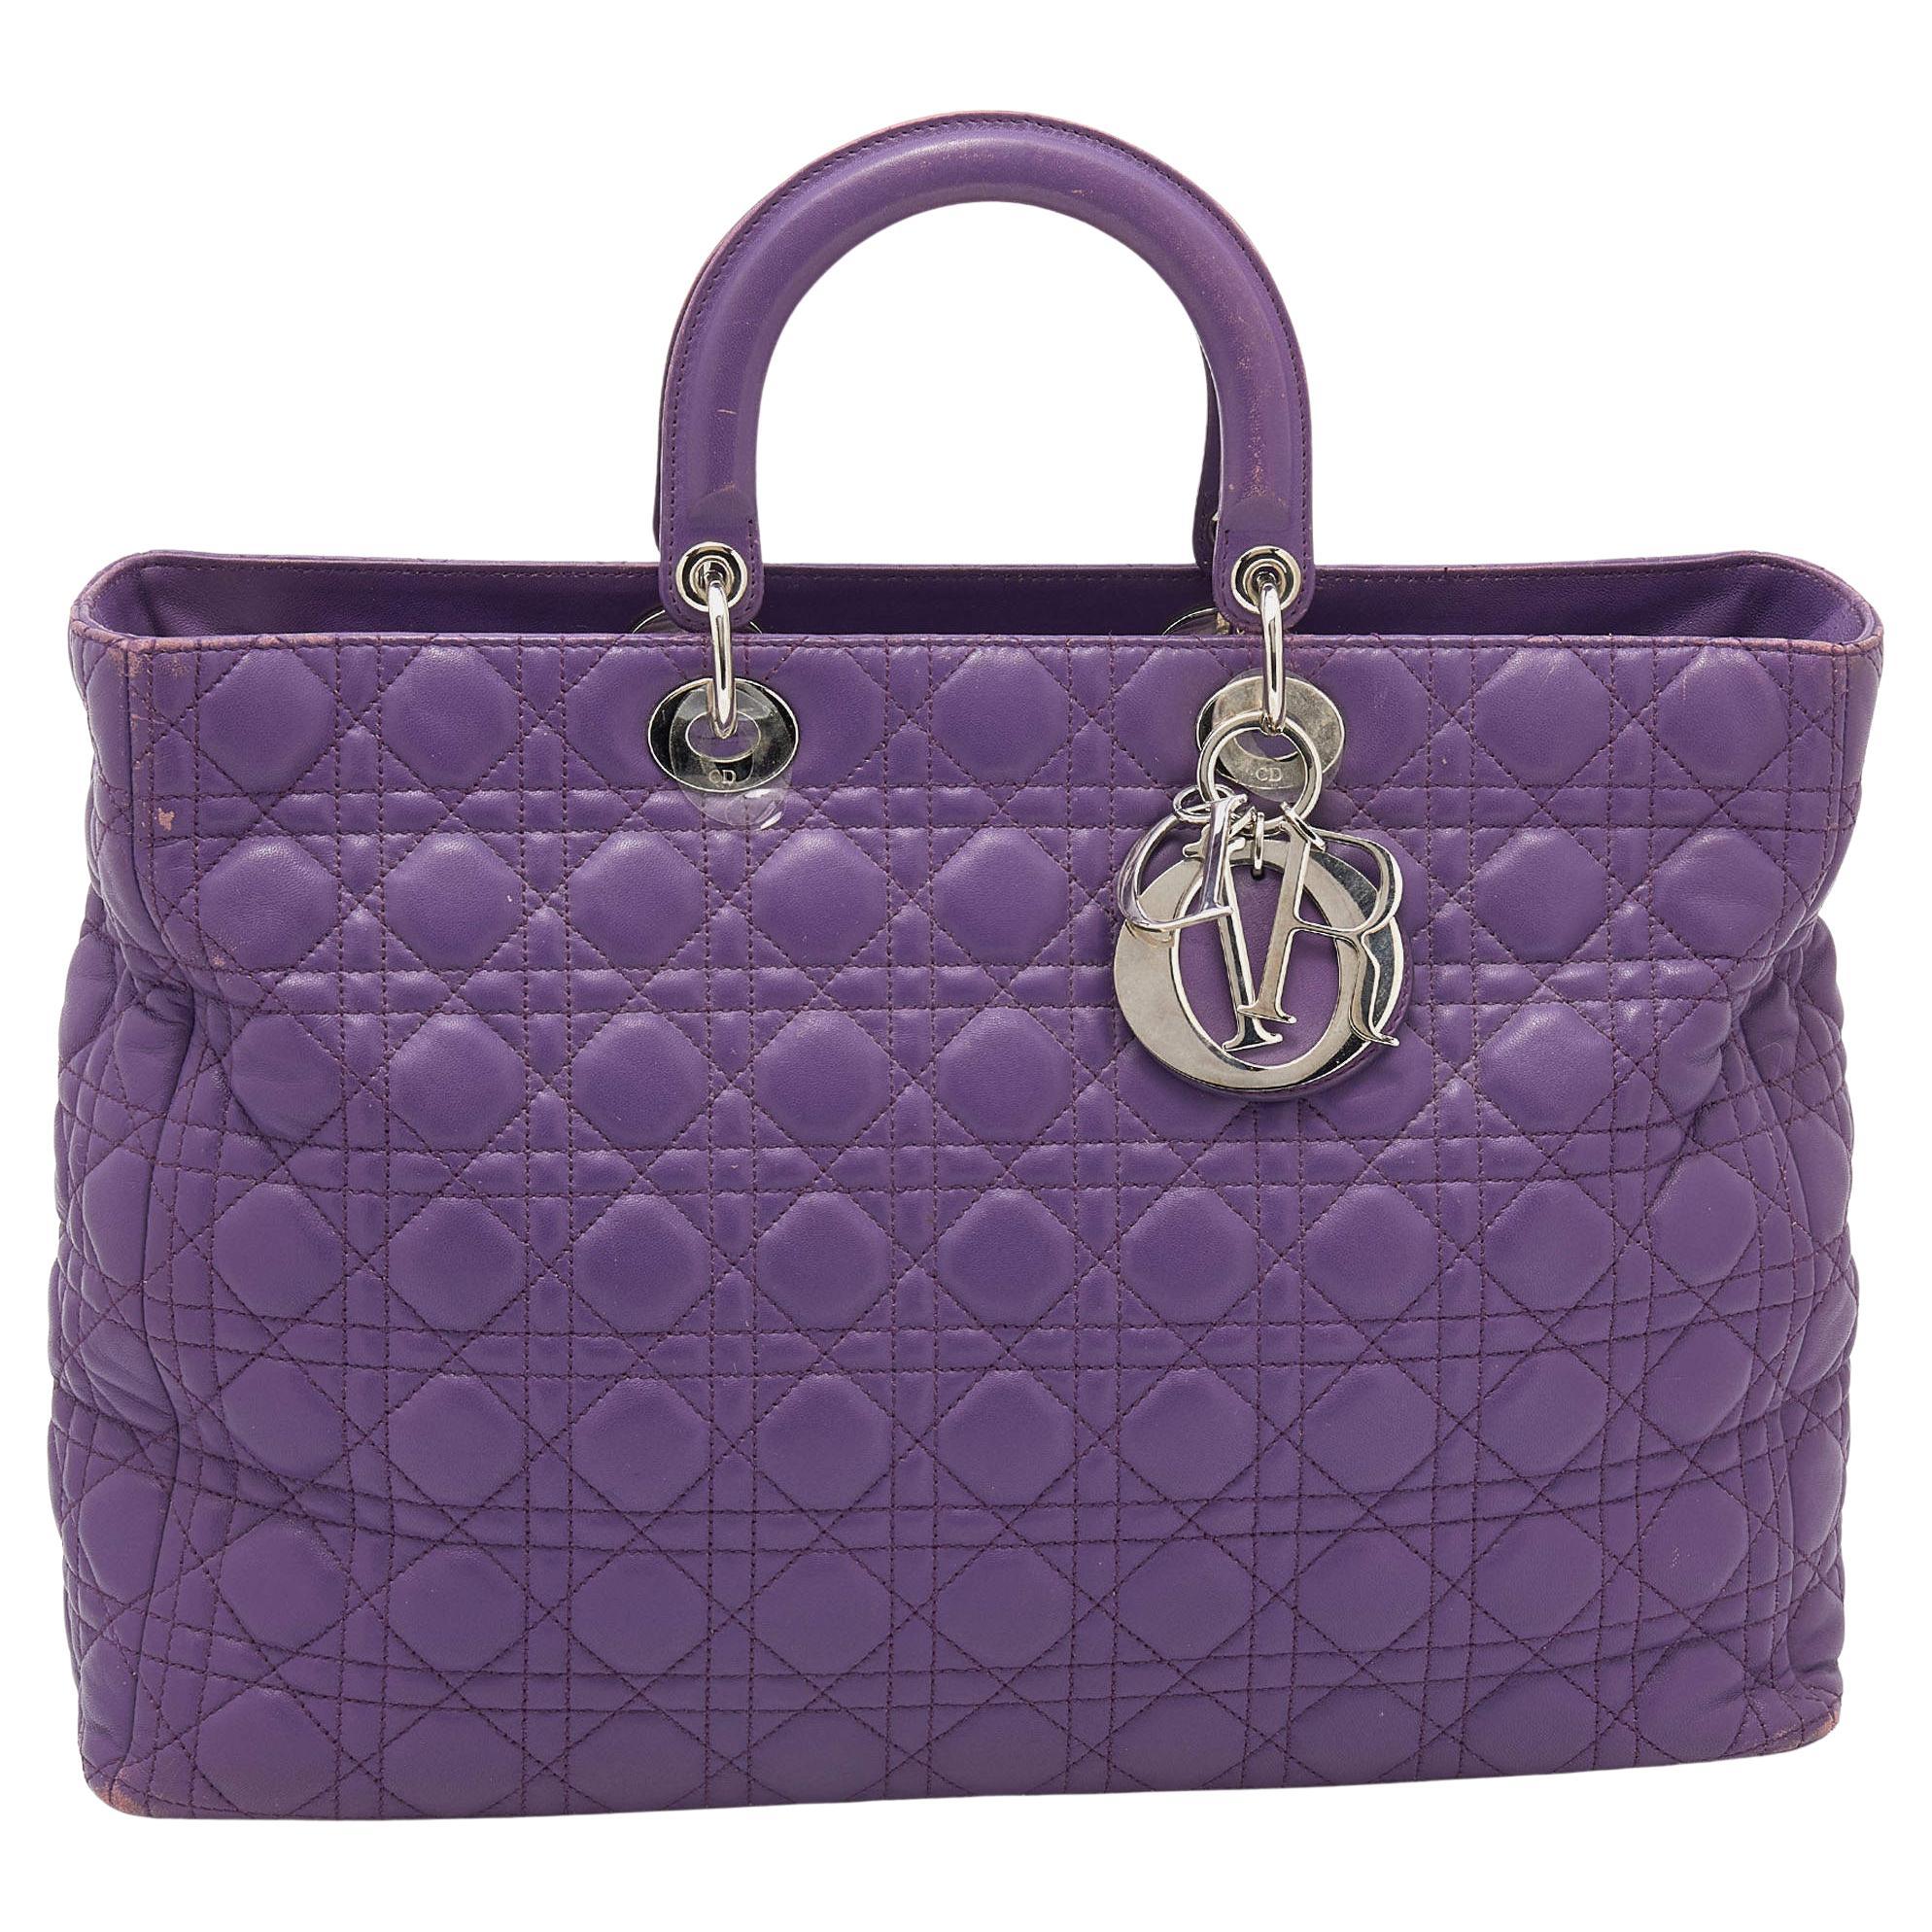 Dior Purple Cannage Leather Large Soft Lady Dior Tote